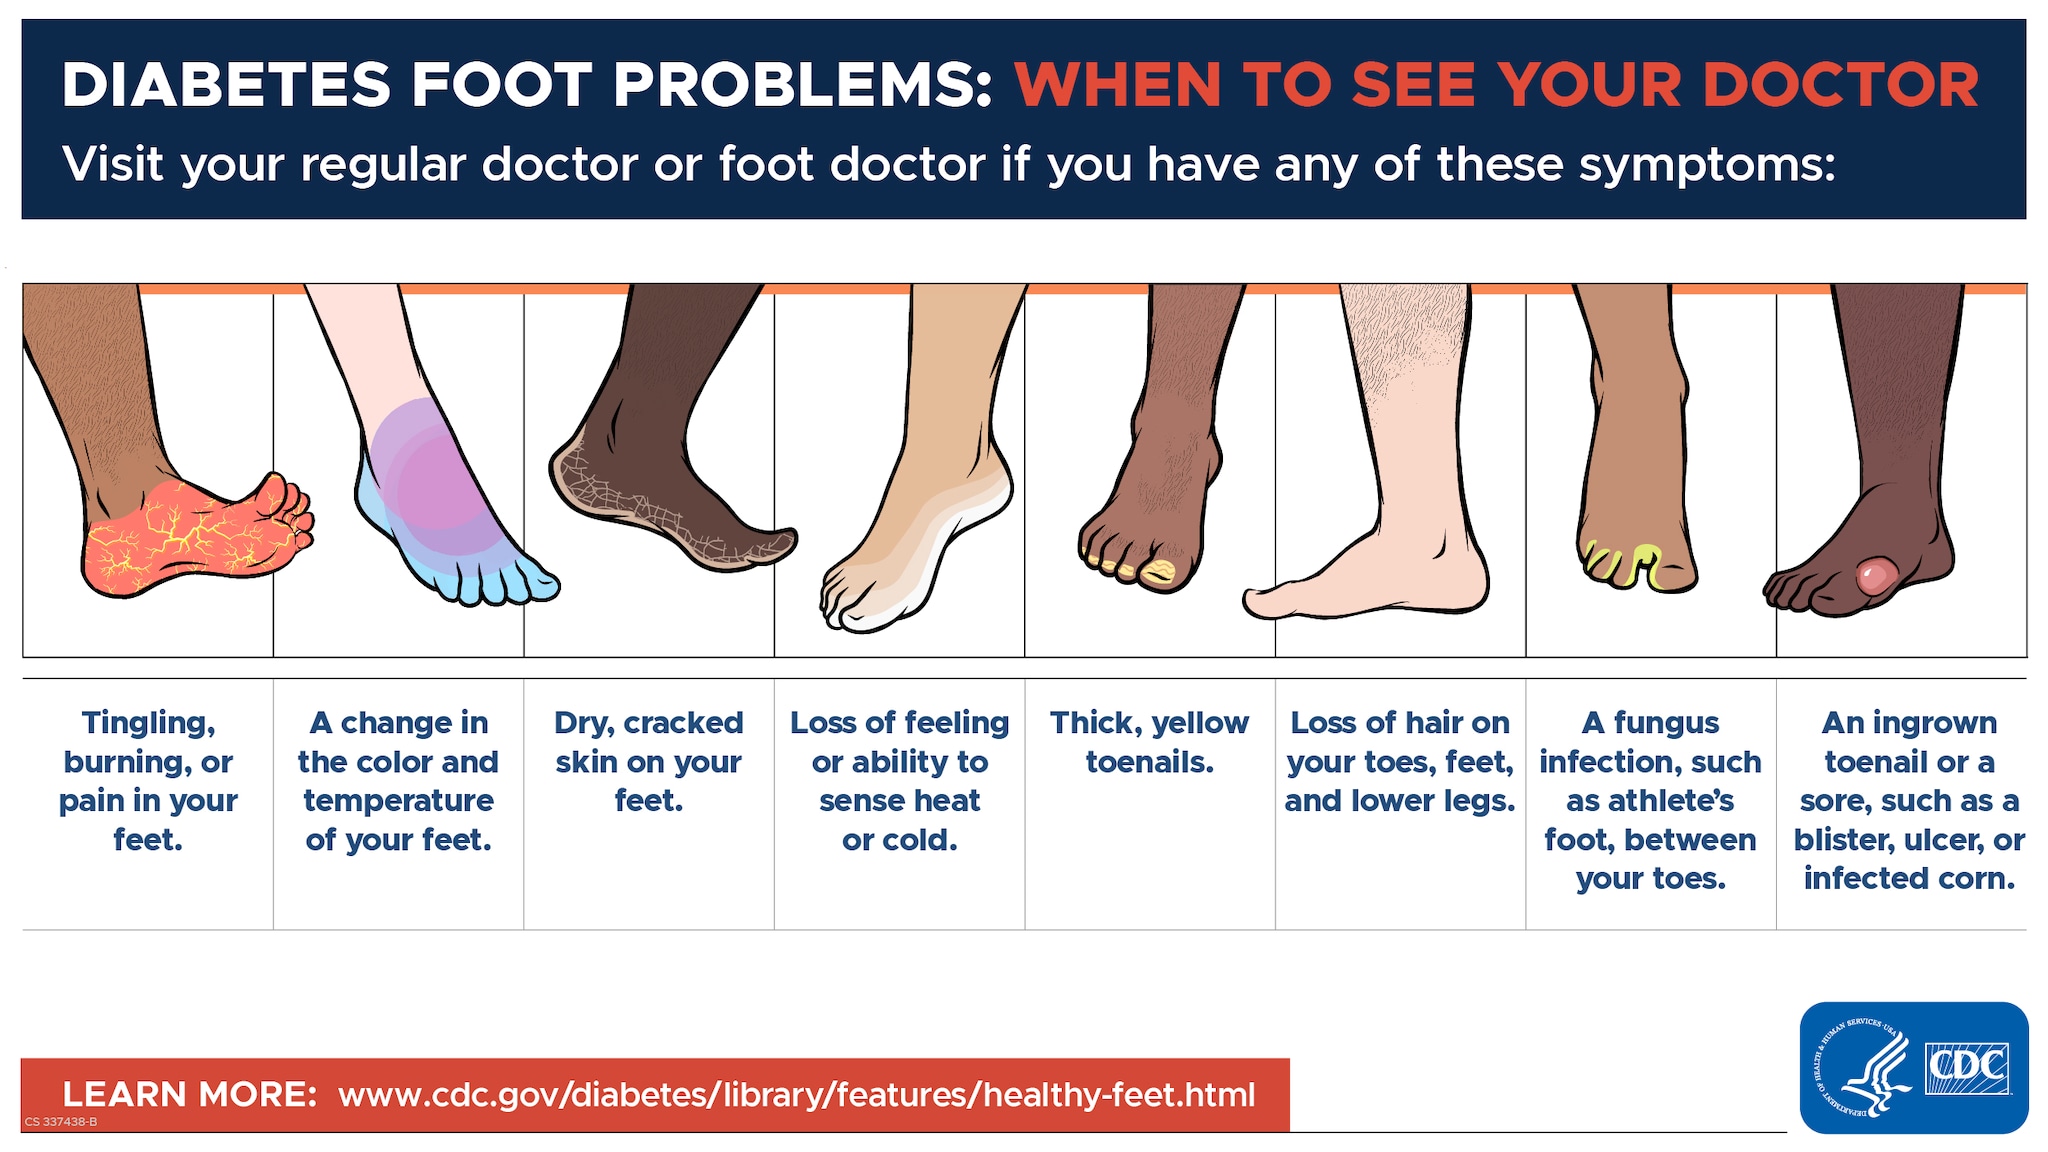 Diabetes Foot Problems: When to See Your Doctor